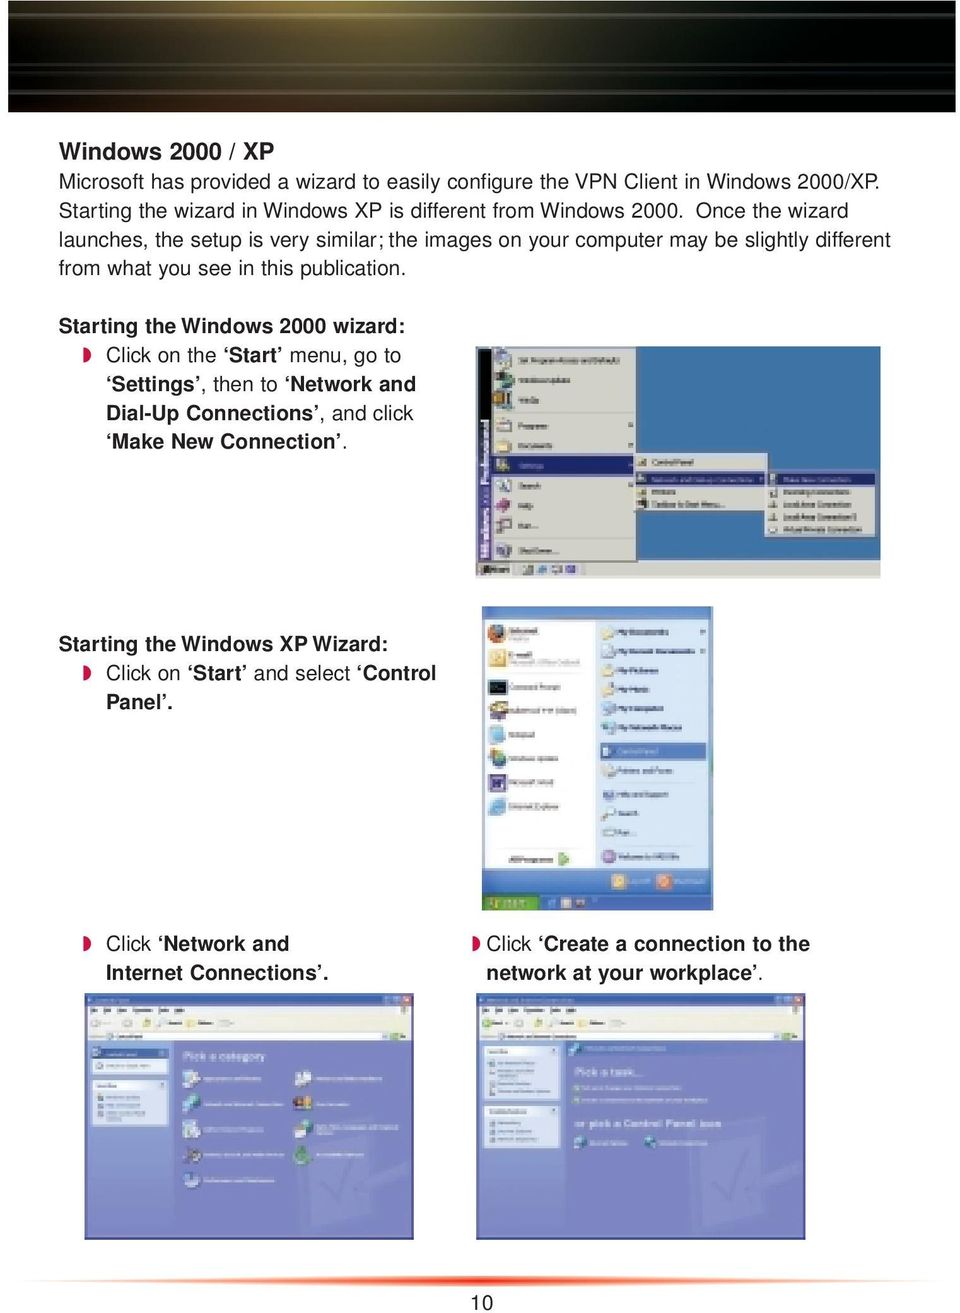 Once the wizard launches, the setup is very similar; the images on your computer may be slightly different from what you see in this publication.